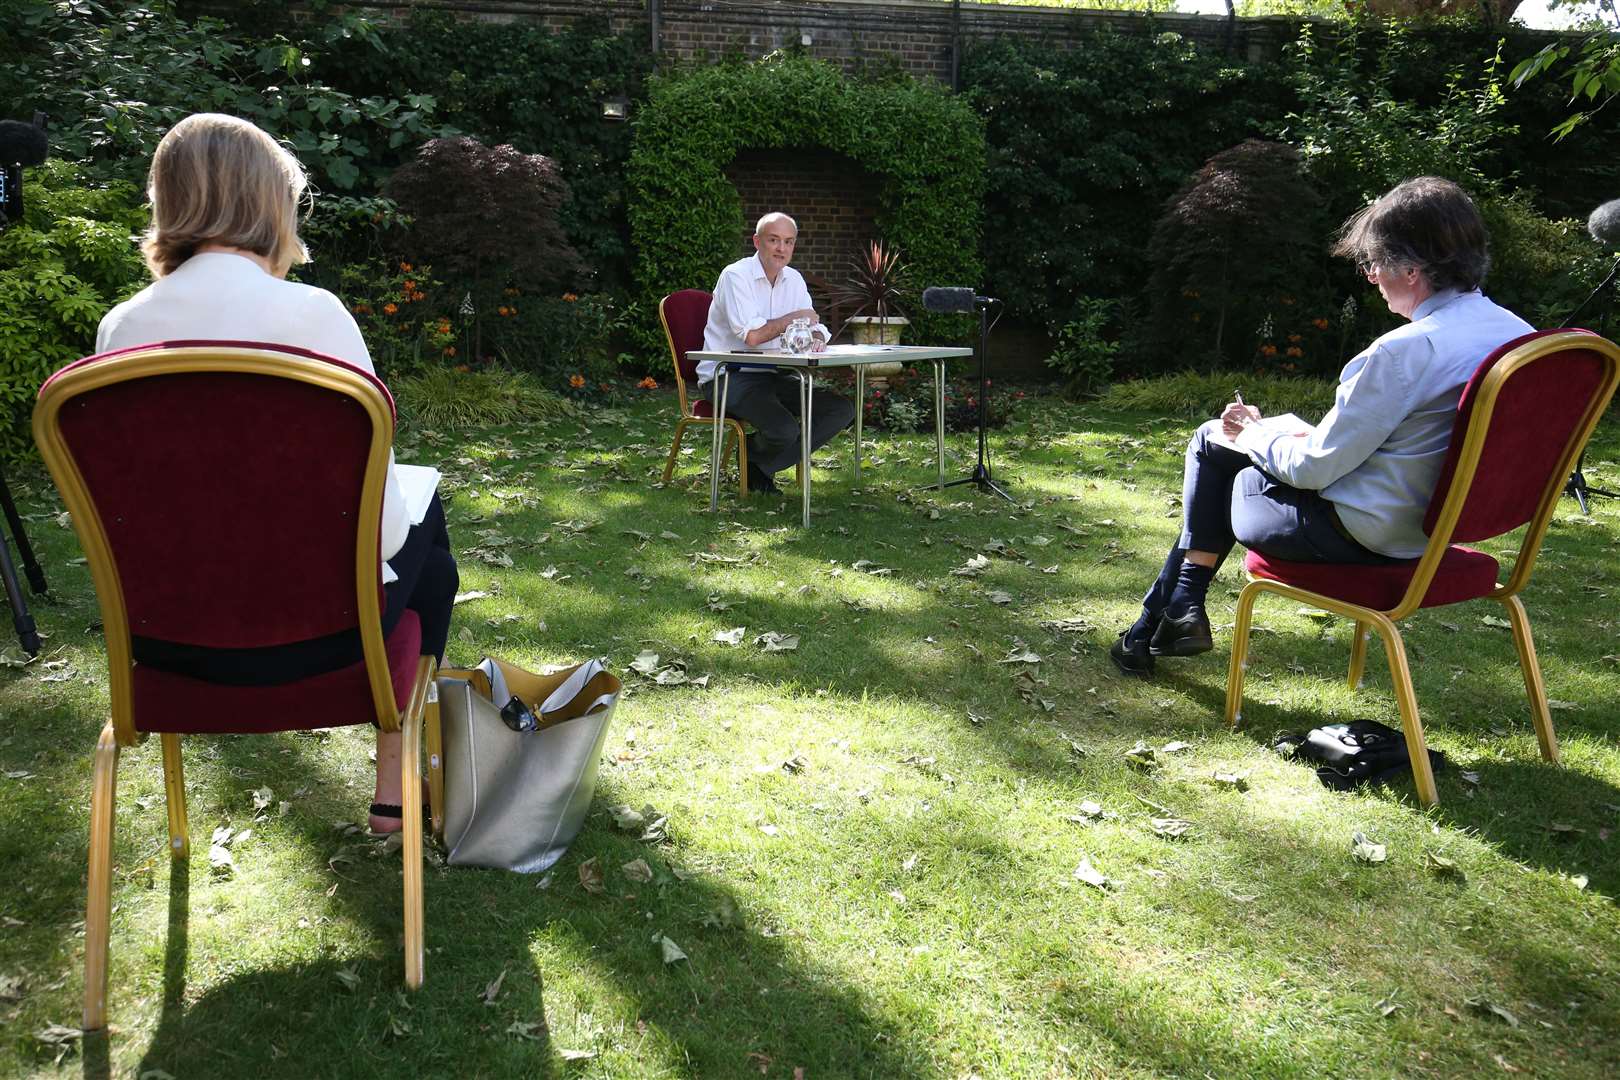 Journalists sit at a distance while listening to Dominic Cummings, senior aide to Prime Minister Boris Johnson, who made a statement in the Downing Street rose garden about his trip to Durham during lockdown restrictions (Jonathan Brady/PA)